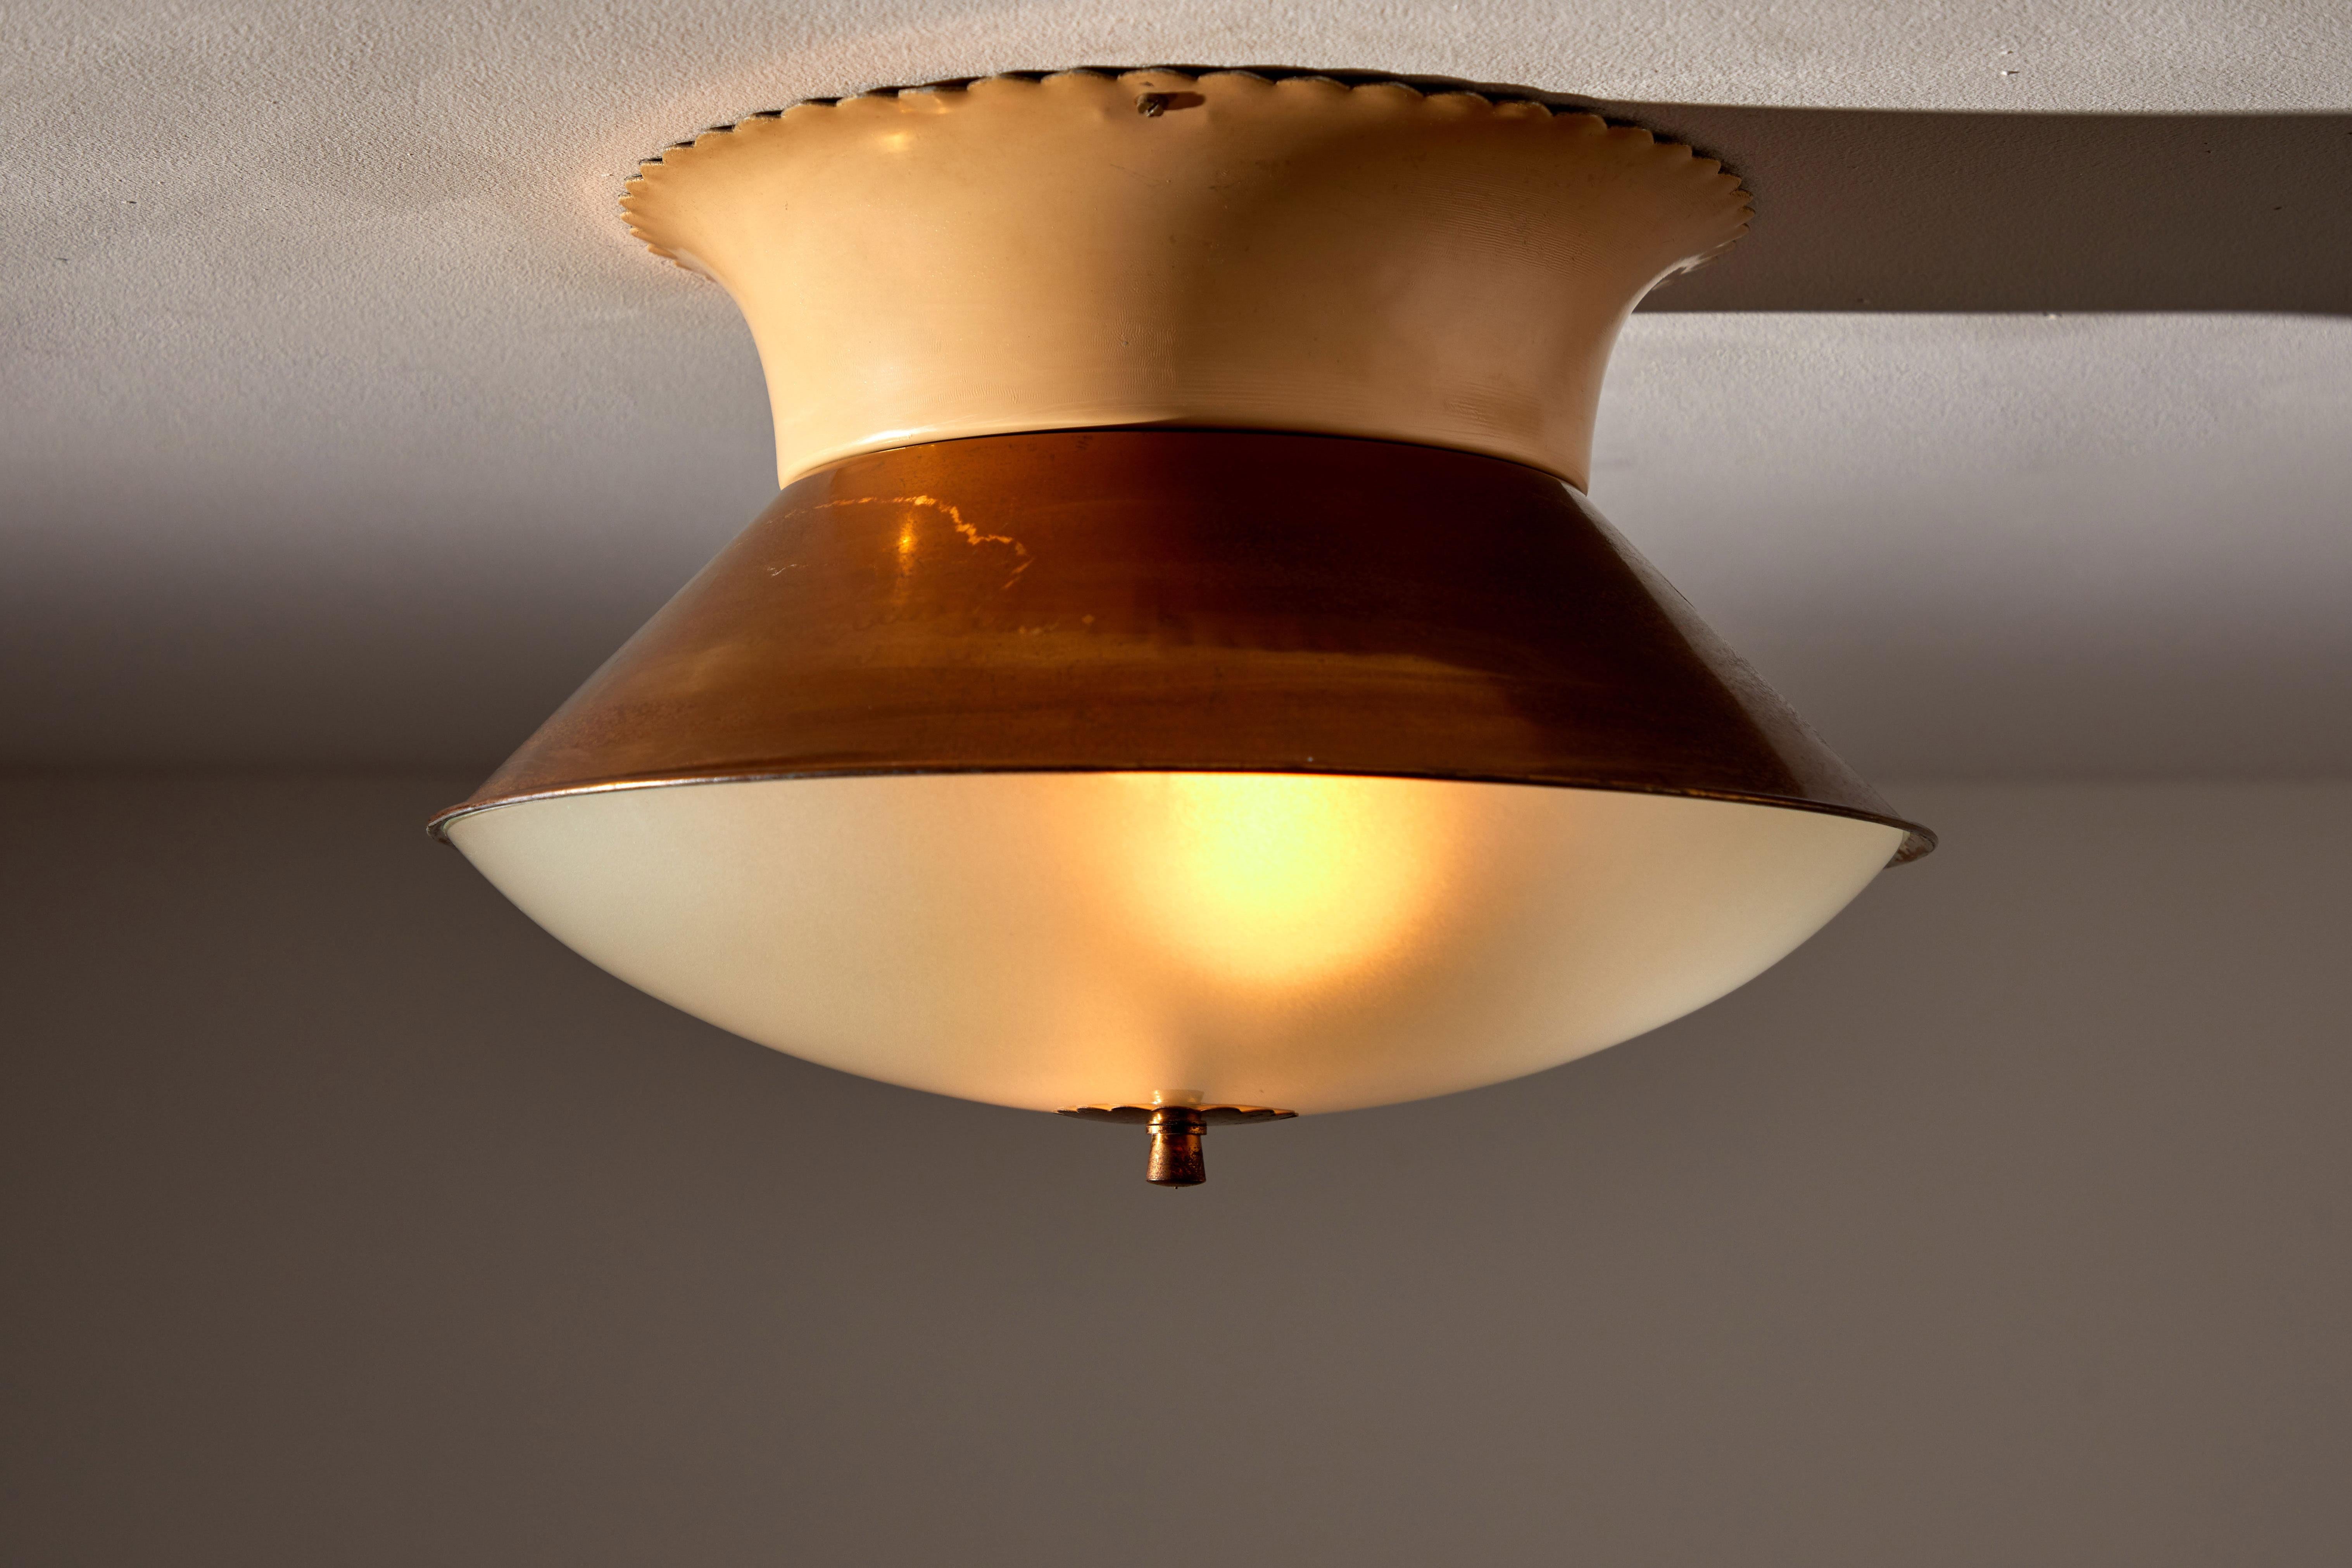 Flush mount ceiling light by Lumi. Manufactured in Italy circa 1950s. Opaline glass diffuser, brass armature and finial, enameled metal base. Rewired for US junction boxes. Takes two E27 25w maximum bulbs. Bulbs included as a one time courtesy.